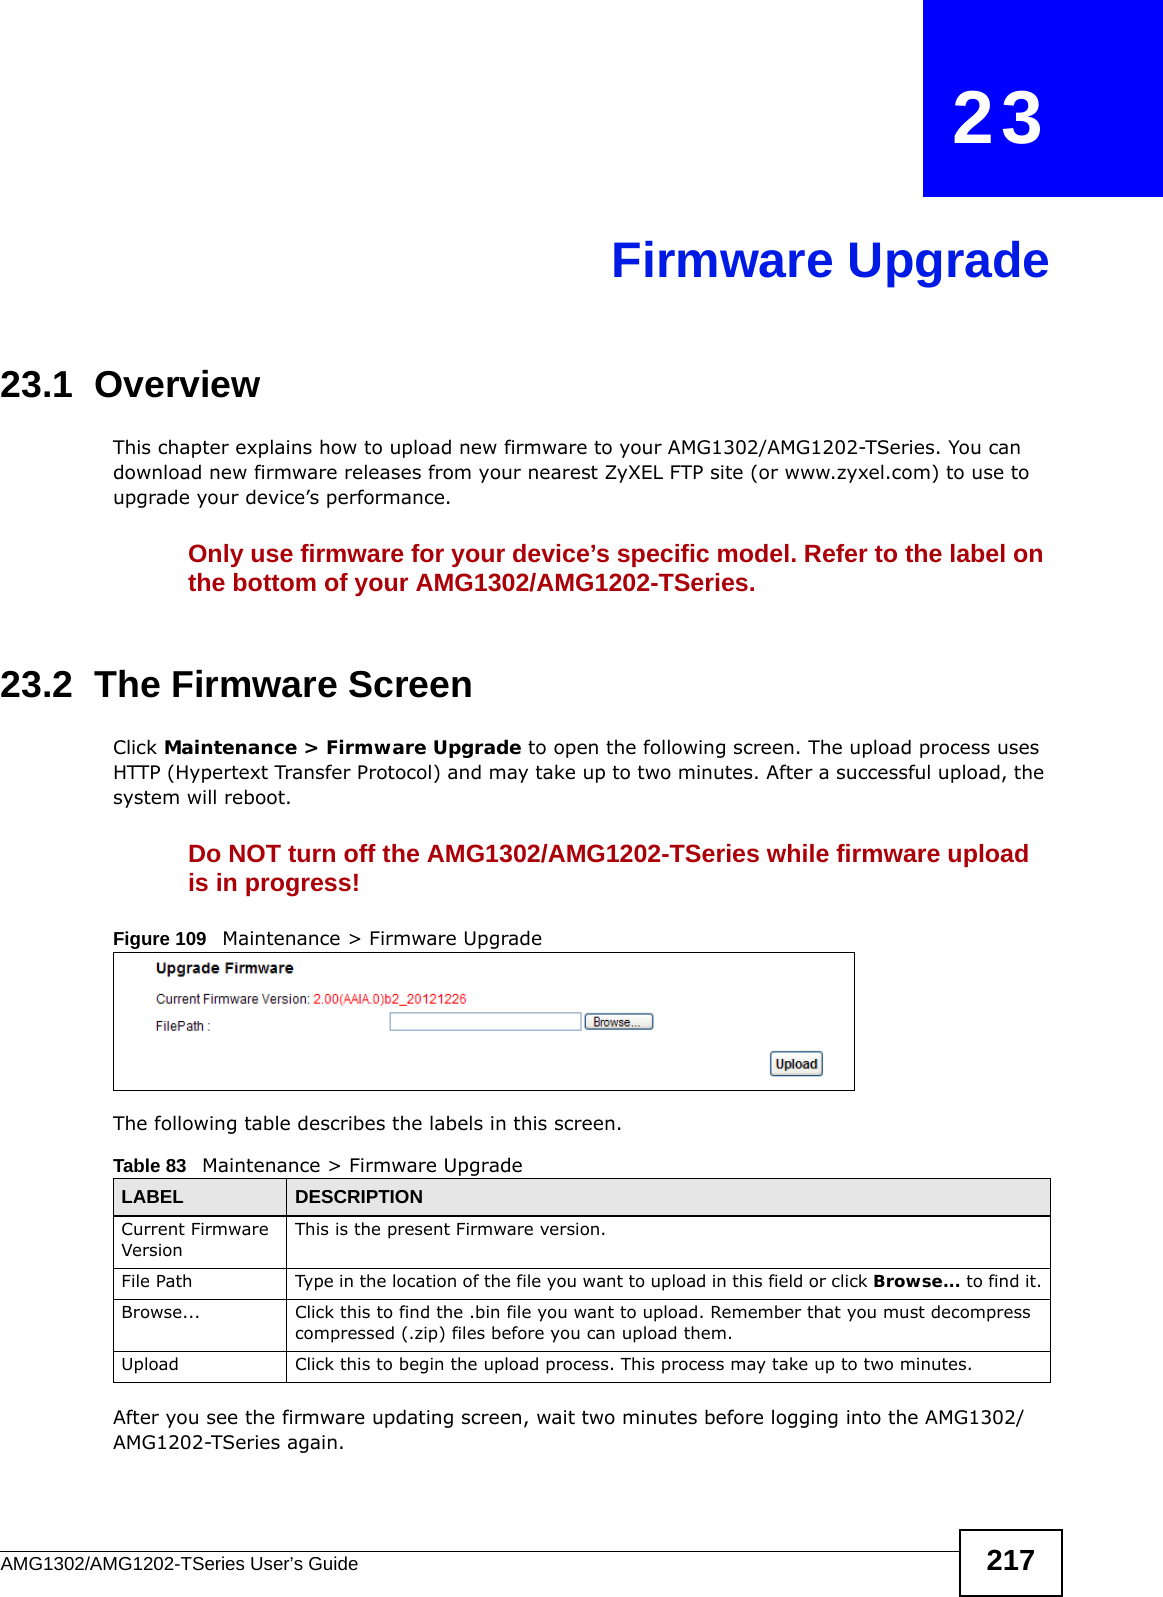 AMG1302/AMG1202-TSeries User’s Guide 217CHAPTER   23Firmware Upgrade23.1  OverviewThis chapter explains how to upload new firmware to your AMG1302/AMG1202-TSeries. You can download new firmware releases from your nearest ZyXEL FTP site (or www.zyxel.com) to use to upgrade your device’s performance.Only use firmware for your device’s specific model. Refer to the label on the bottom of your AMG1302/AMG1202-TSeries.23.2  The Firmware ScreenClick Maintenance &gt; Firmware Upgrade to open the following screen. The upload process uses HTTP (Hypertext Transfer Protocol) and may take up to two minutes. After a successful upload, the system will reboot. Do NOT turn off the AMG1302/AMG1202-TSeries while firmware upload is in progress!Figure 109   Maintenance &gt; Firmware UpgradeThe following table describes the labels in this screen. After you see the firmware updating screen, wait two minutes before logging into the AMG1302/AMG1202-TSeries again. Table 83   Maintenance &gt; Firmware UpgradeLABEL DESCRIPTIONCurrent Firmware VersionThis is the present Firmware version. File Path Type in the location of the file you want to upload in this field or click Browse... to find it.Browse...  Click this to find the .bin file you want to upload. Remember that you must decompress compressed (.zip) files before you can upload them. Upload  Click this to begin the upload process. This process may take up to two minutes.